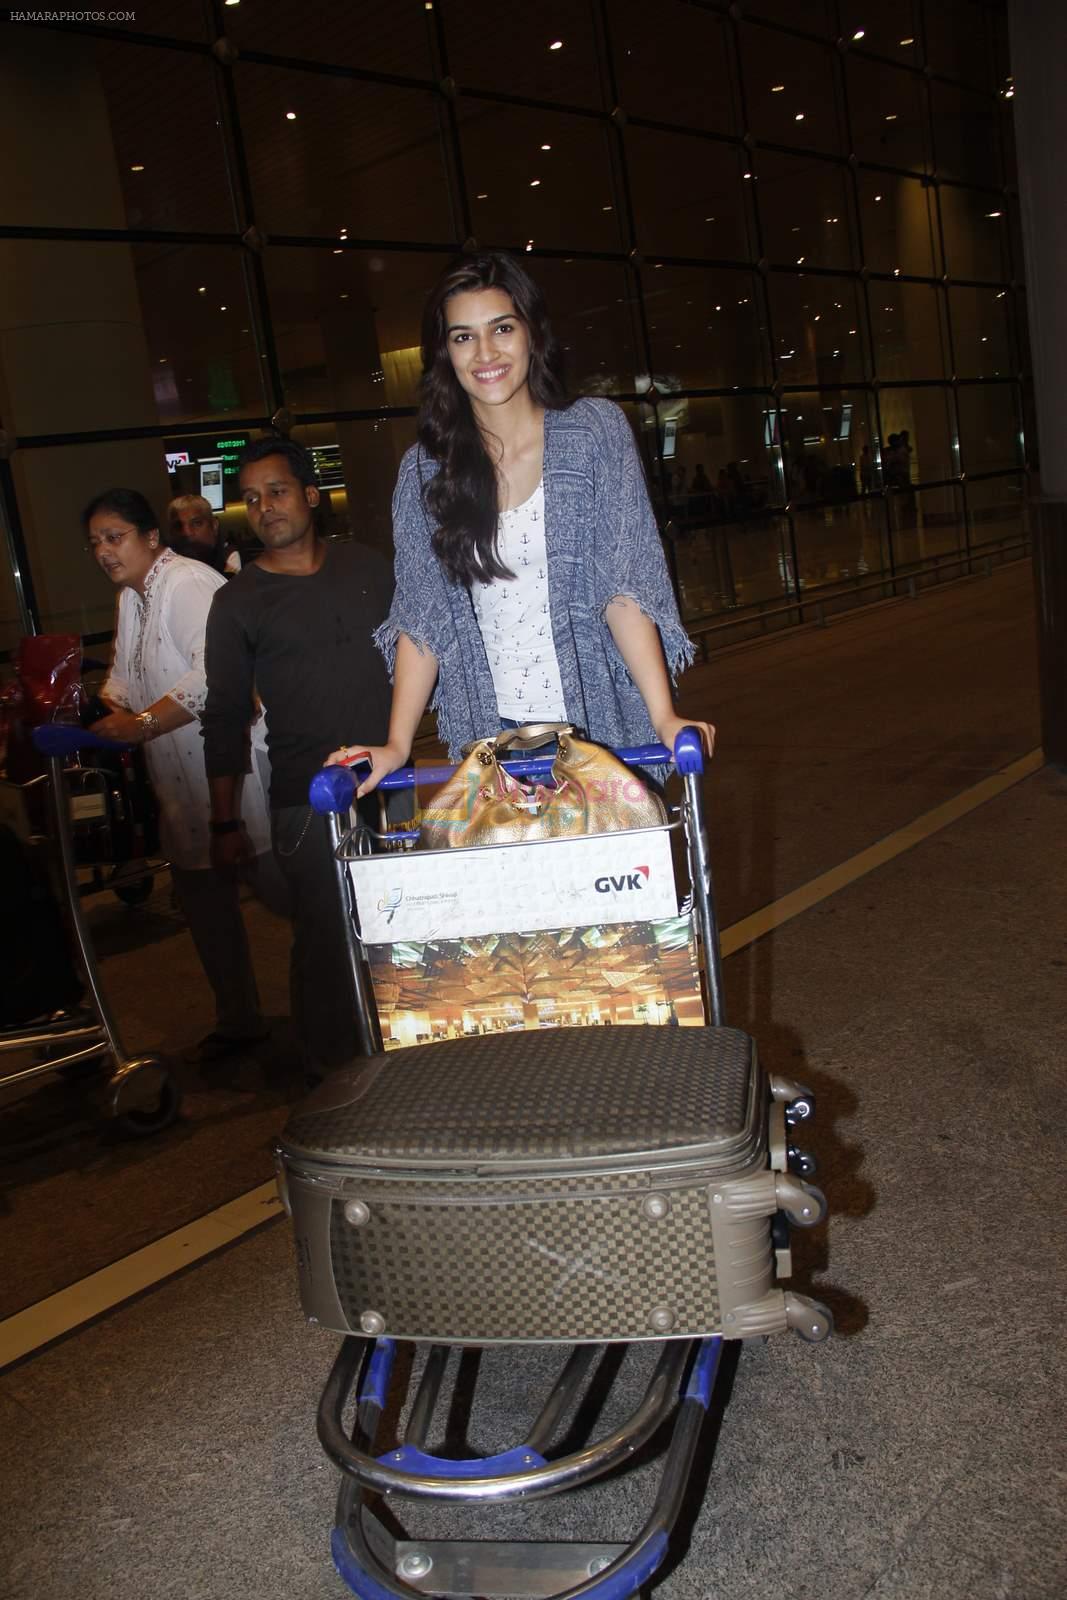 Kriti Sanon with Dilwale team return from Bulgaria in Mumbai Airport on 1st July 2015